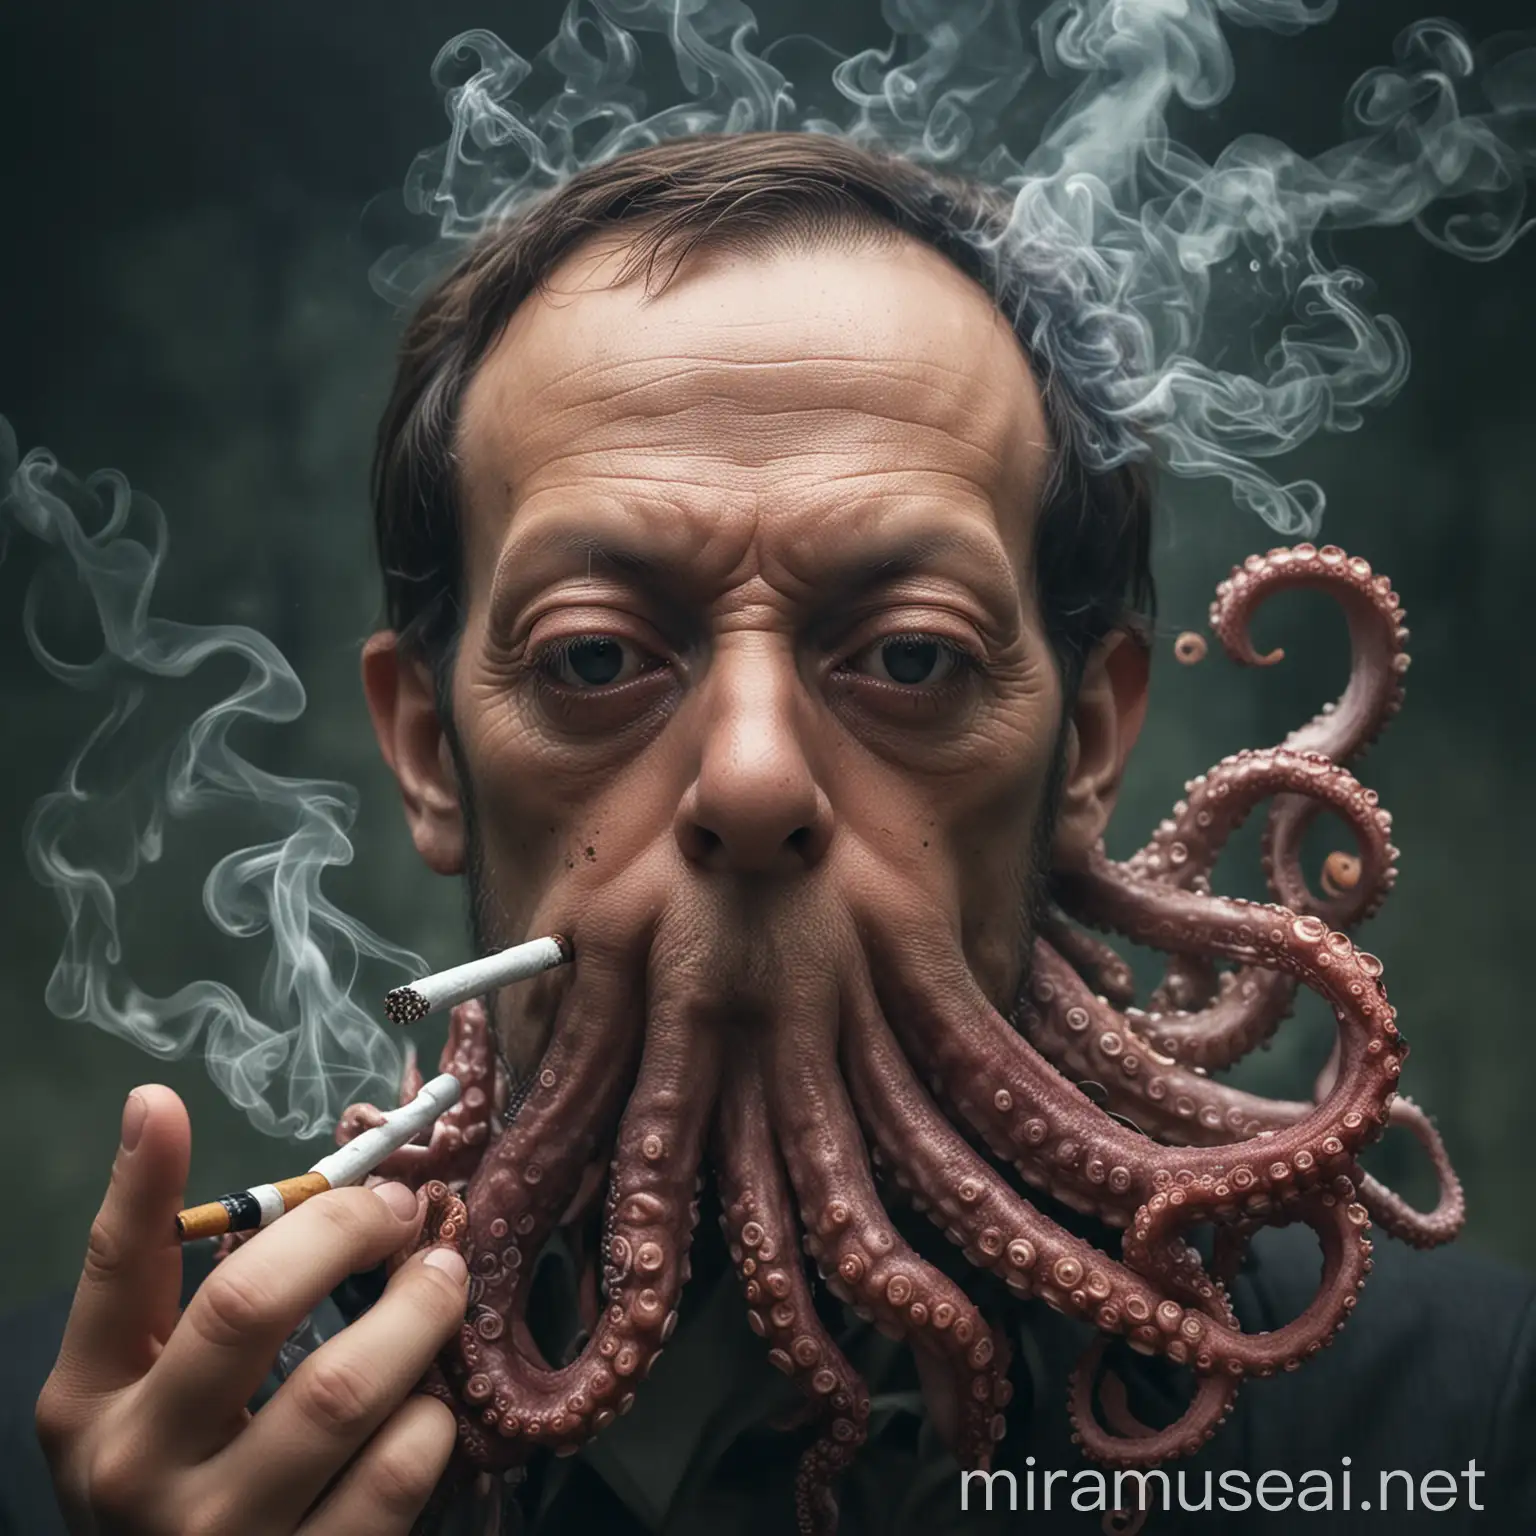 Realistic Octopus with HumanLike Face Smoking